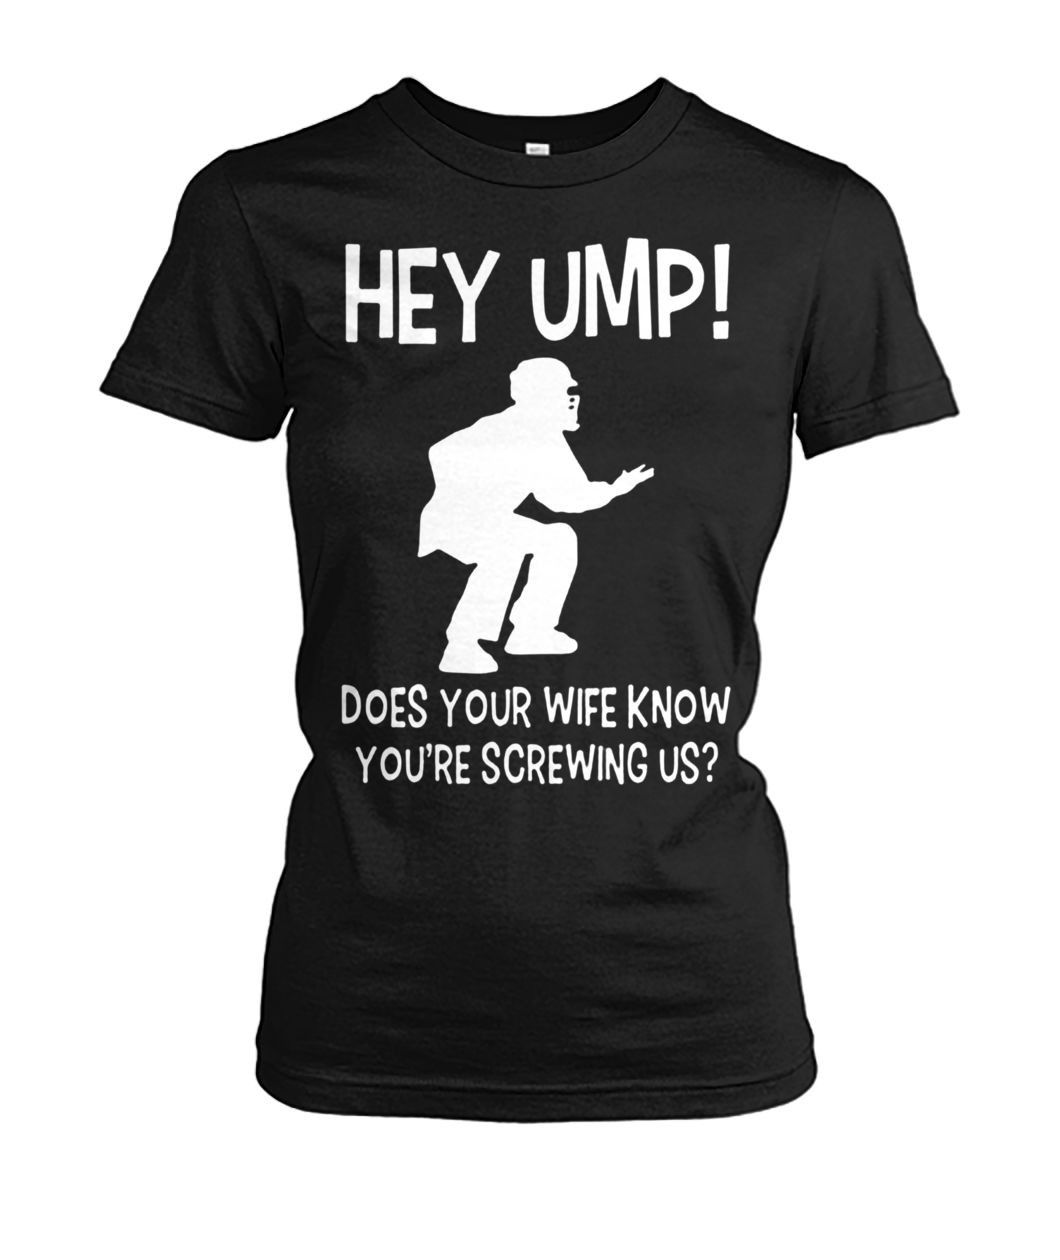 Hey ump does your wife know you're screwing us women's crew tee